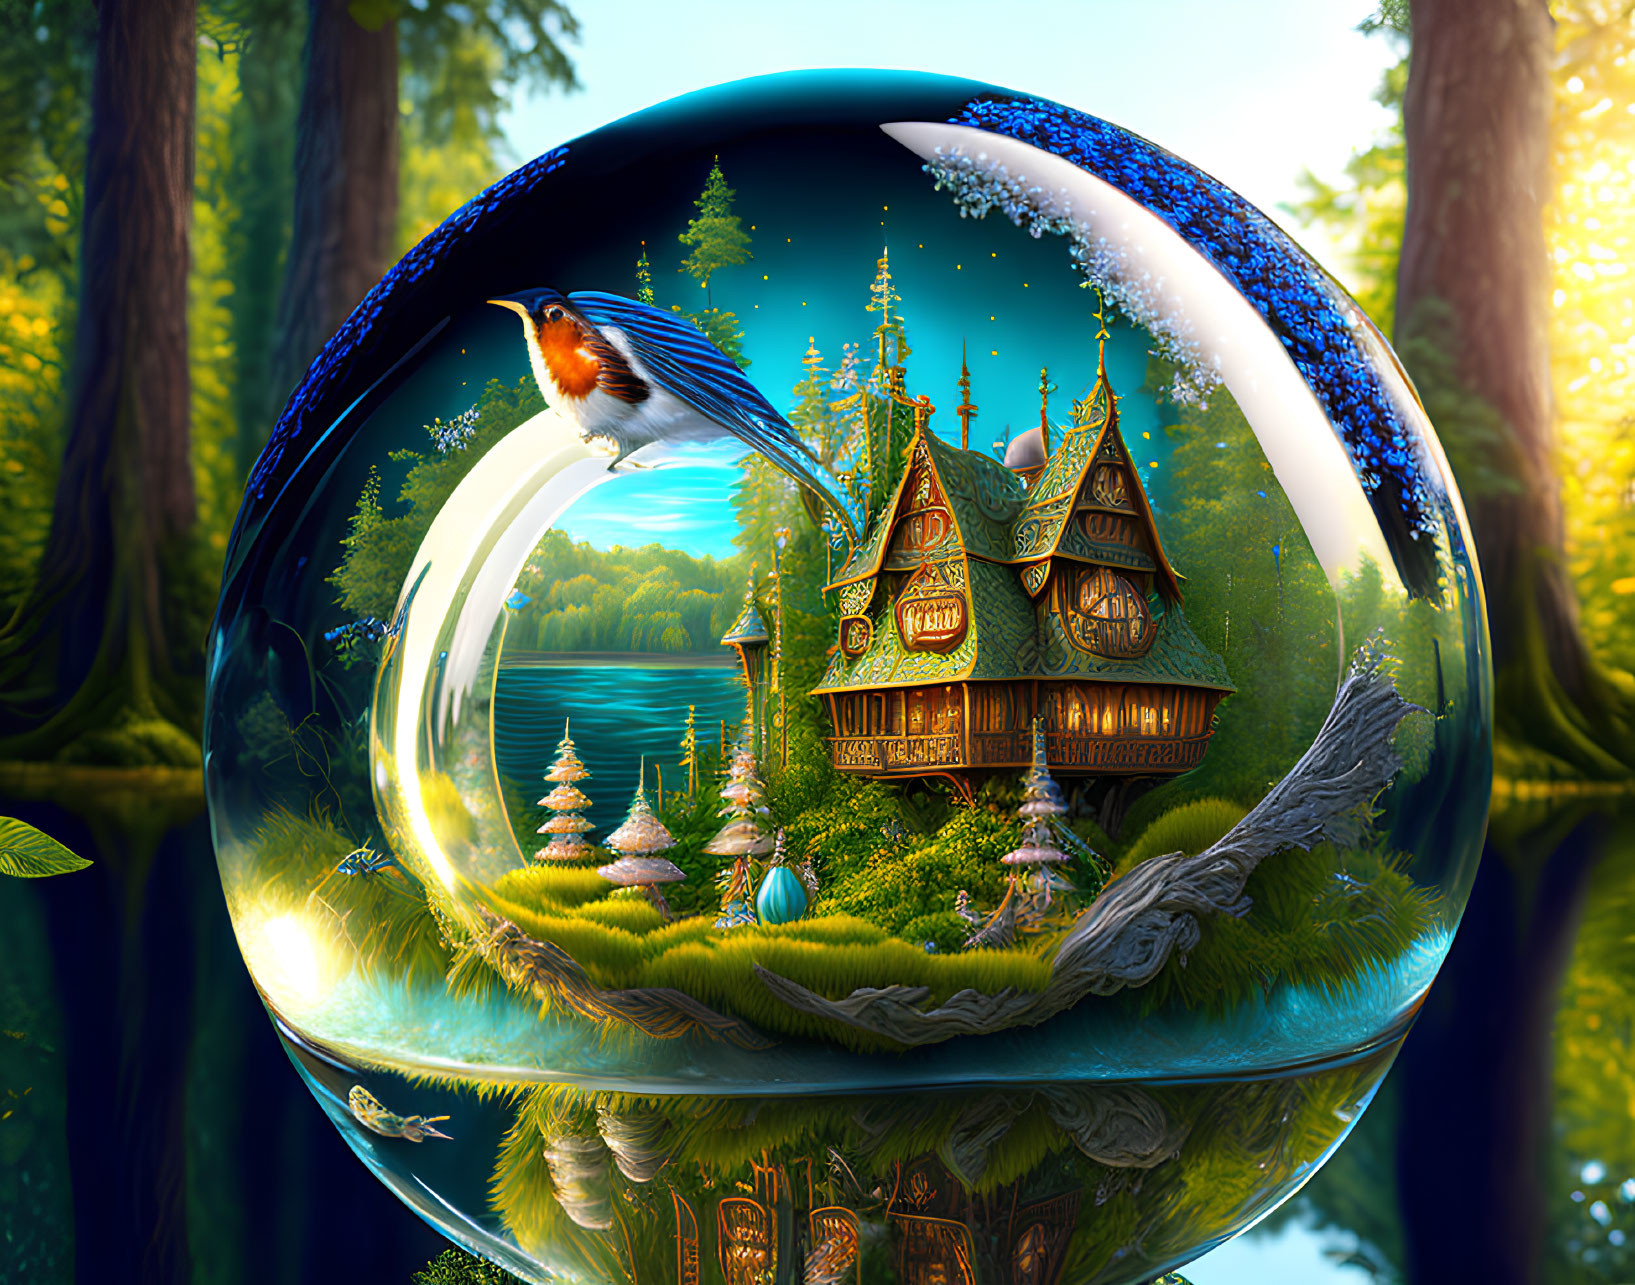 Crystal Ball with Bird Perched in Enchanted Forest Scene